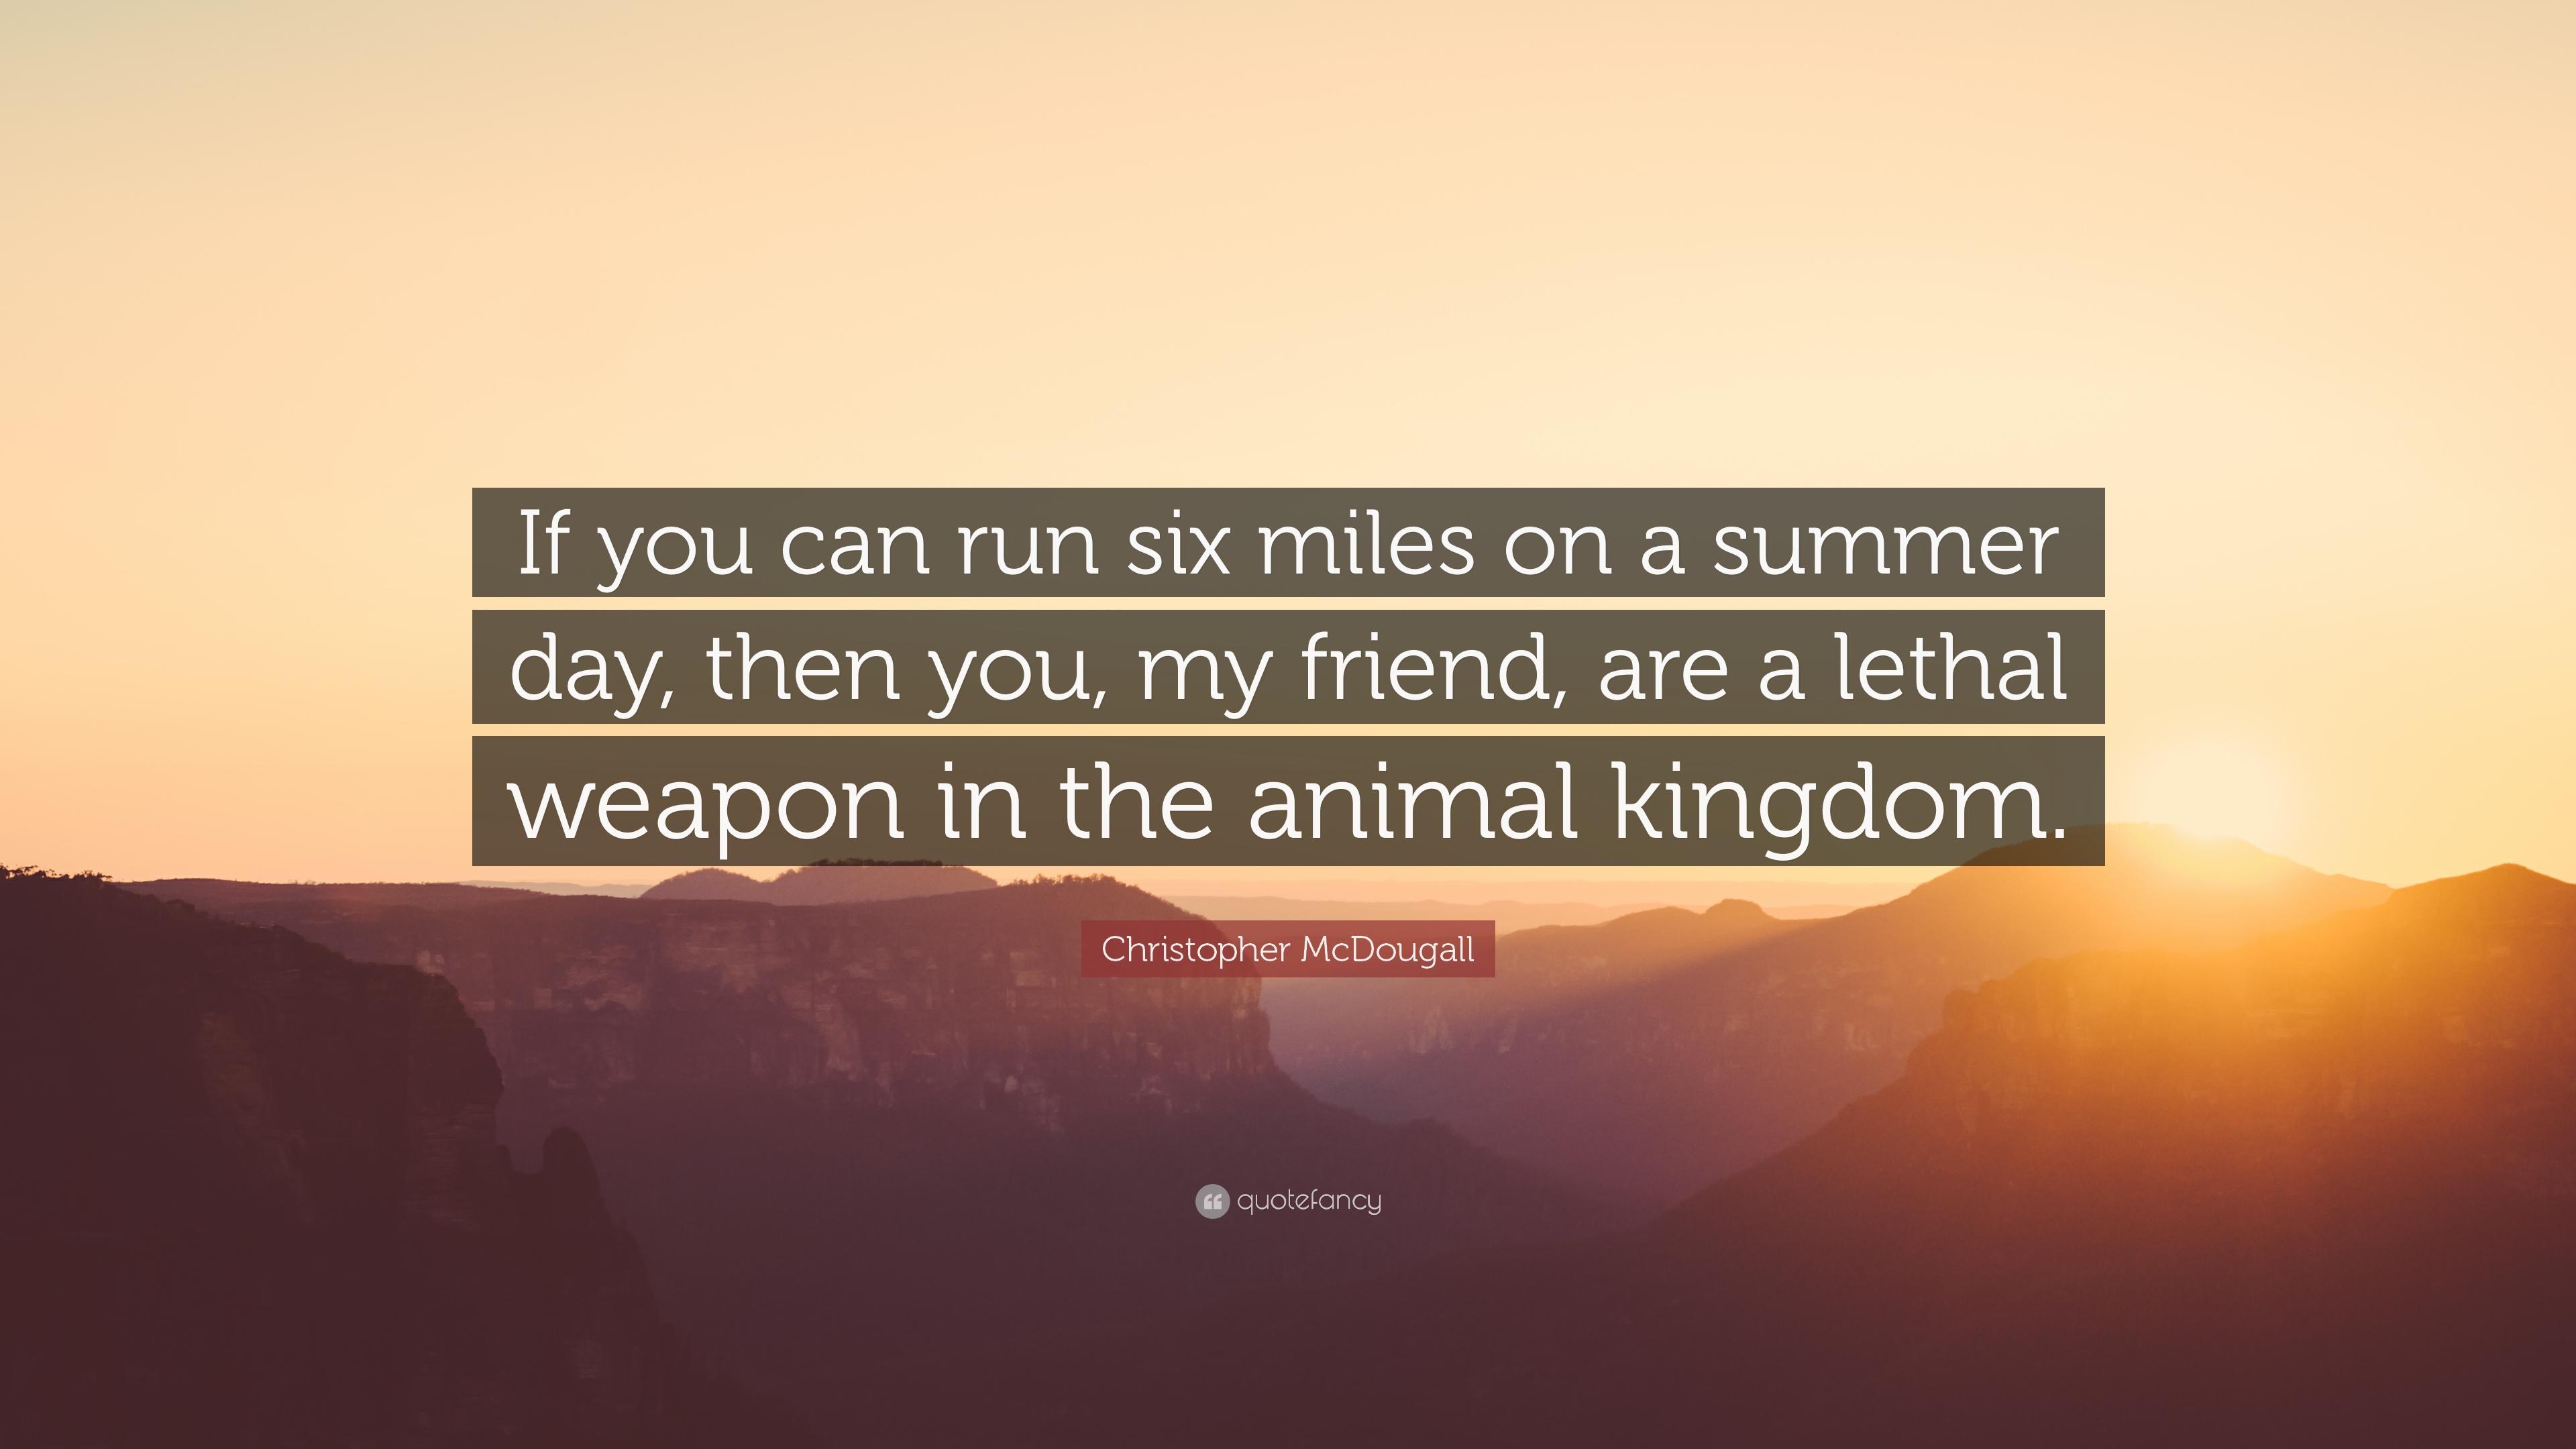 Christopher McDougall Quote: “If you can run six miles on a summer